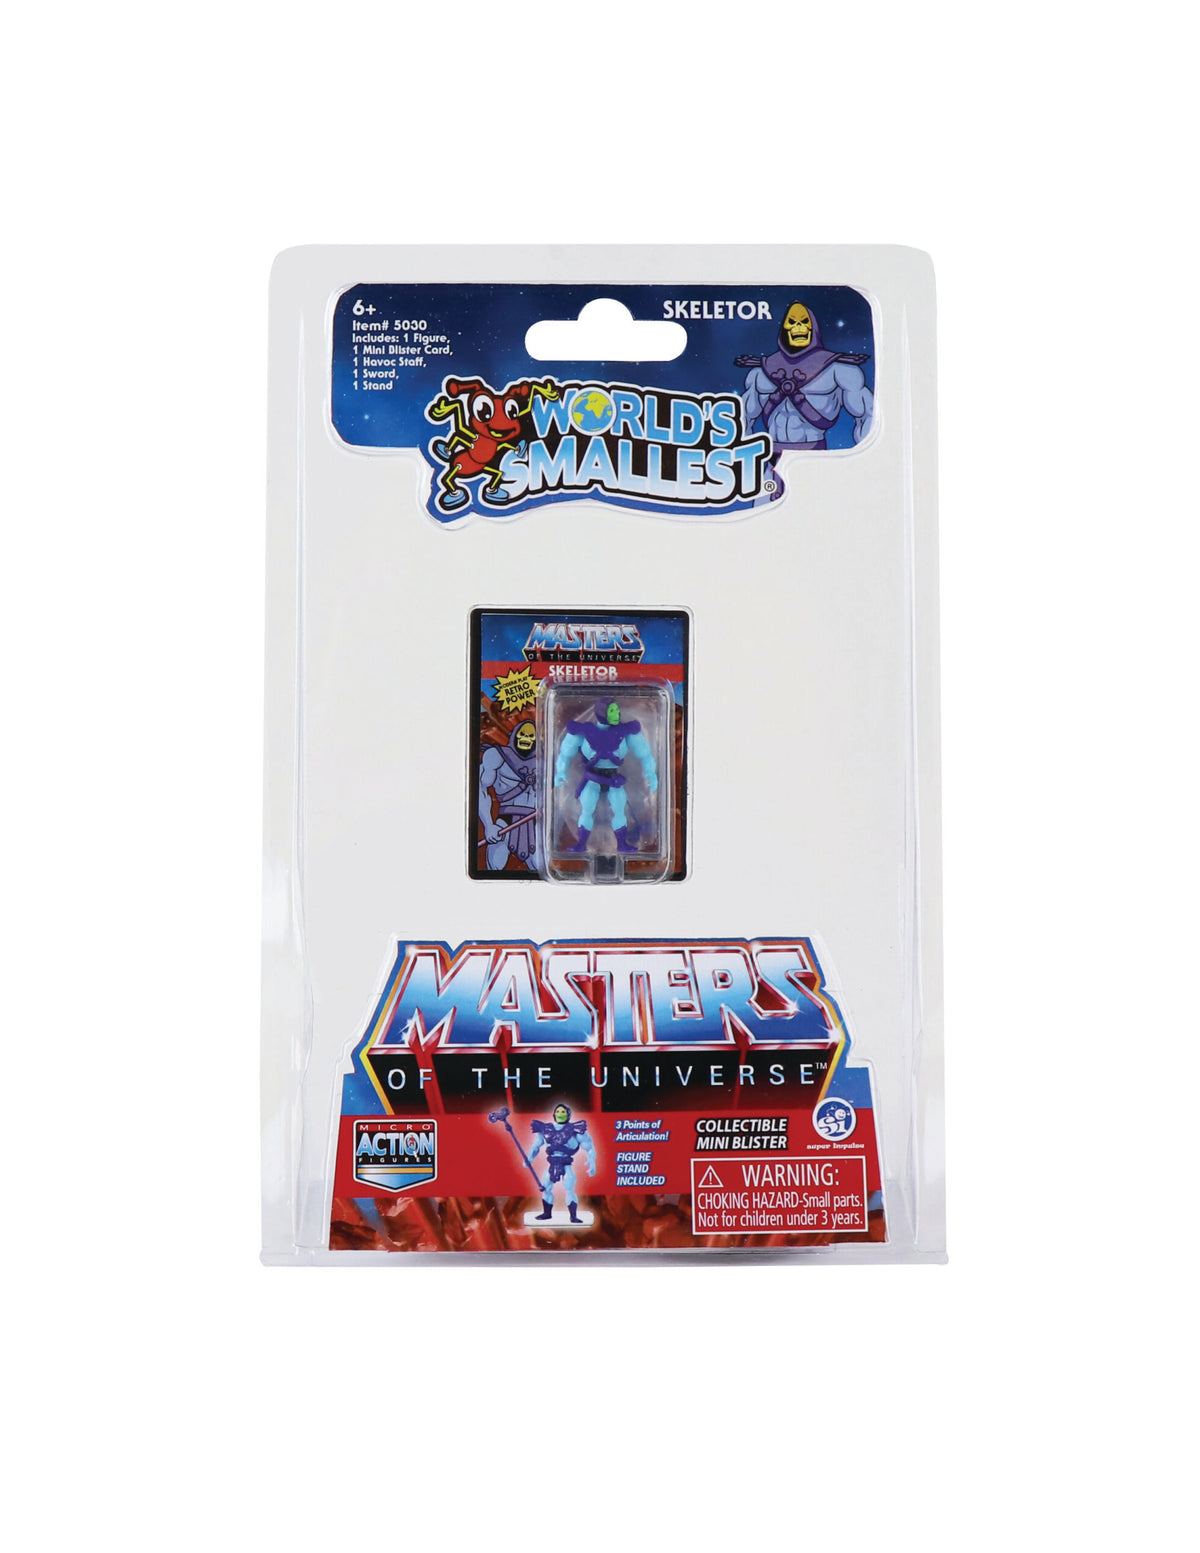 World's Smallest Masters of the Universe Skeletor Micro Action Figure - Zlc Collectibles